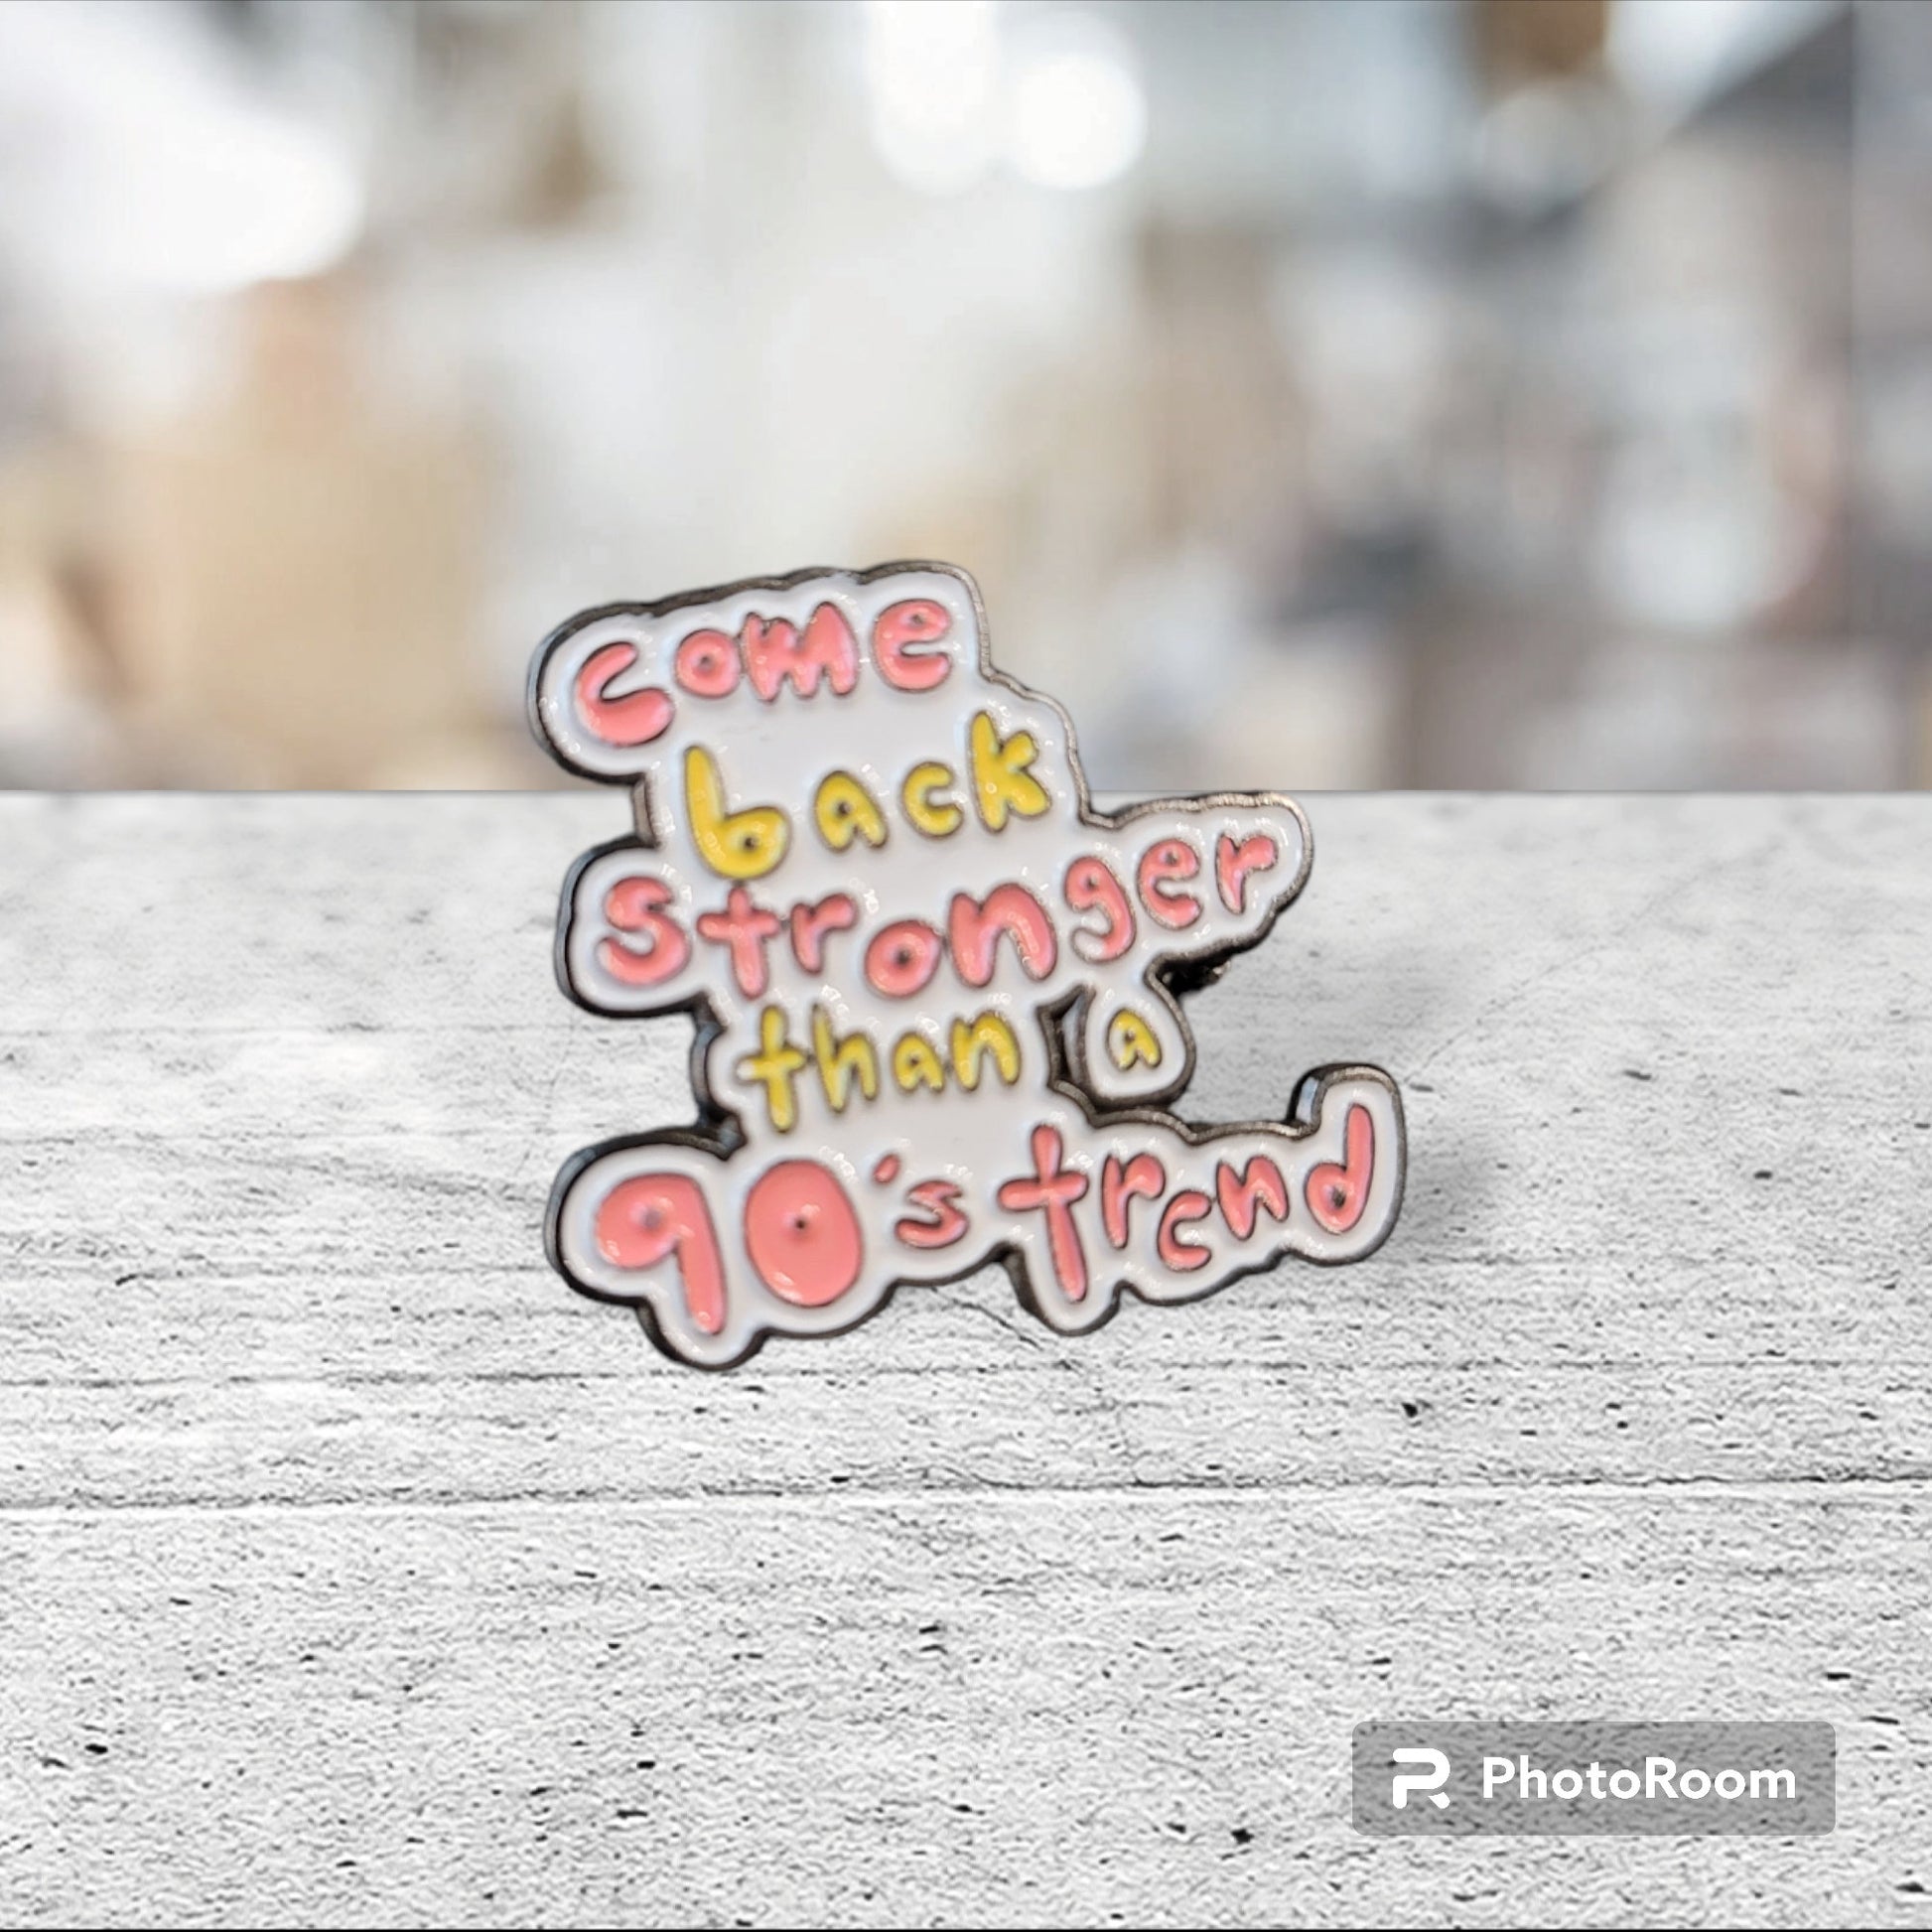 Taylor Swift Inspired Pin, Willow Inspired Pin, Gifts for Swifties, Swiftie Pins, I Come Back Stronger Than A 90s Trend